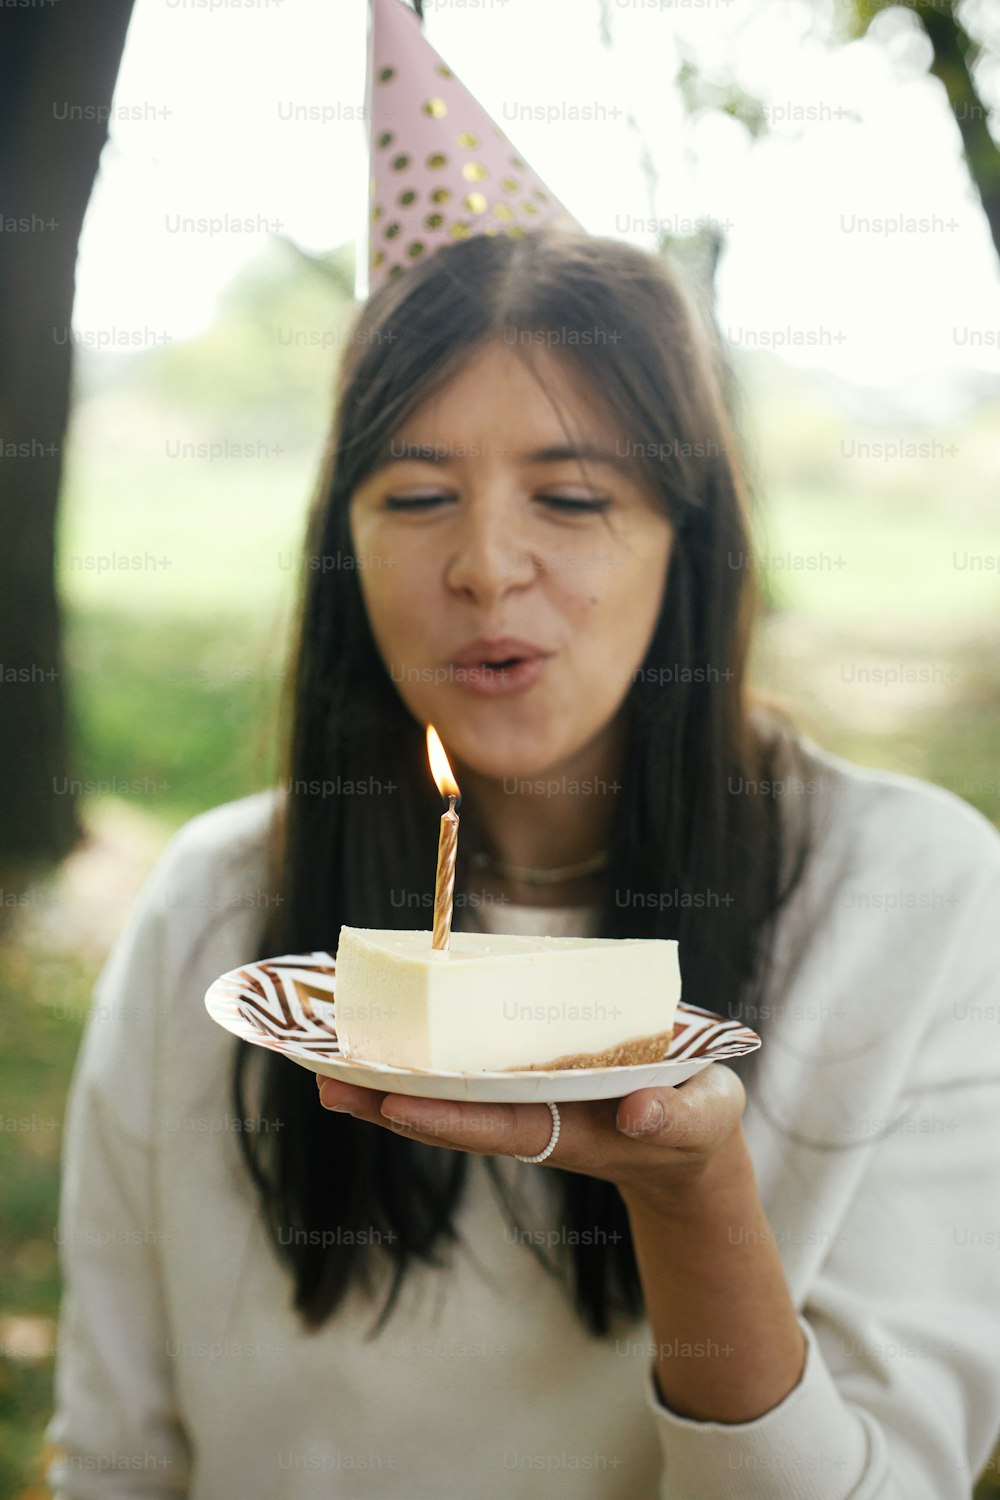 Stylish happy woman in party hat holding piece of birthday cake with burning candle and making a wish. Celebrating birthday at picnic party outdoor.